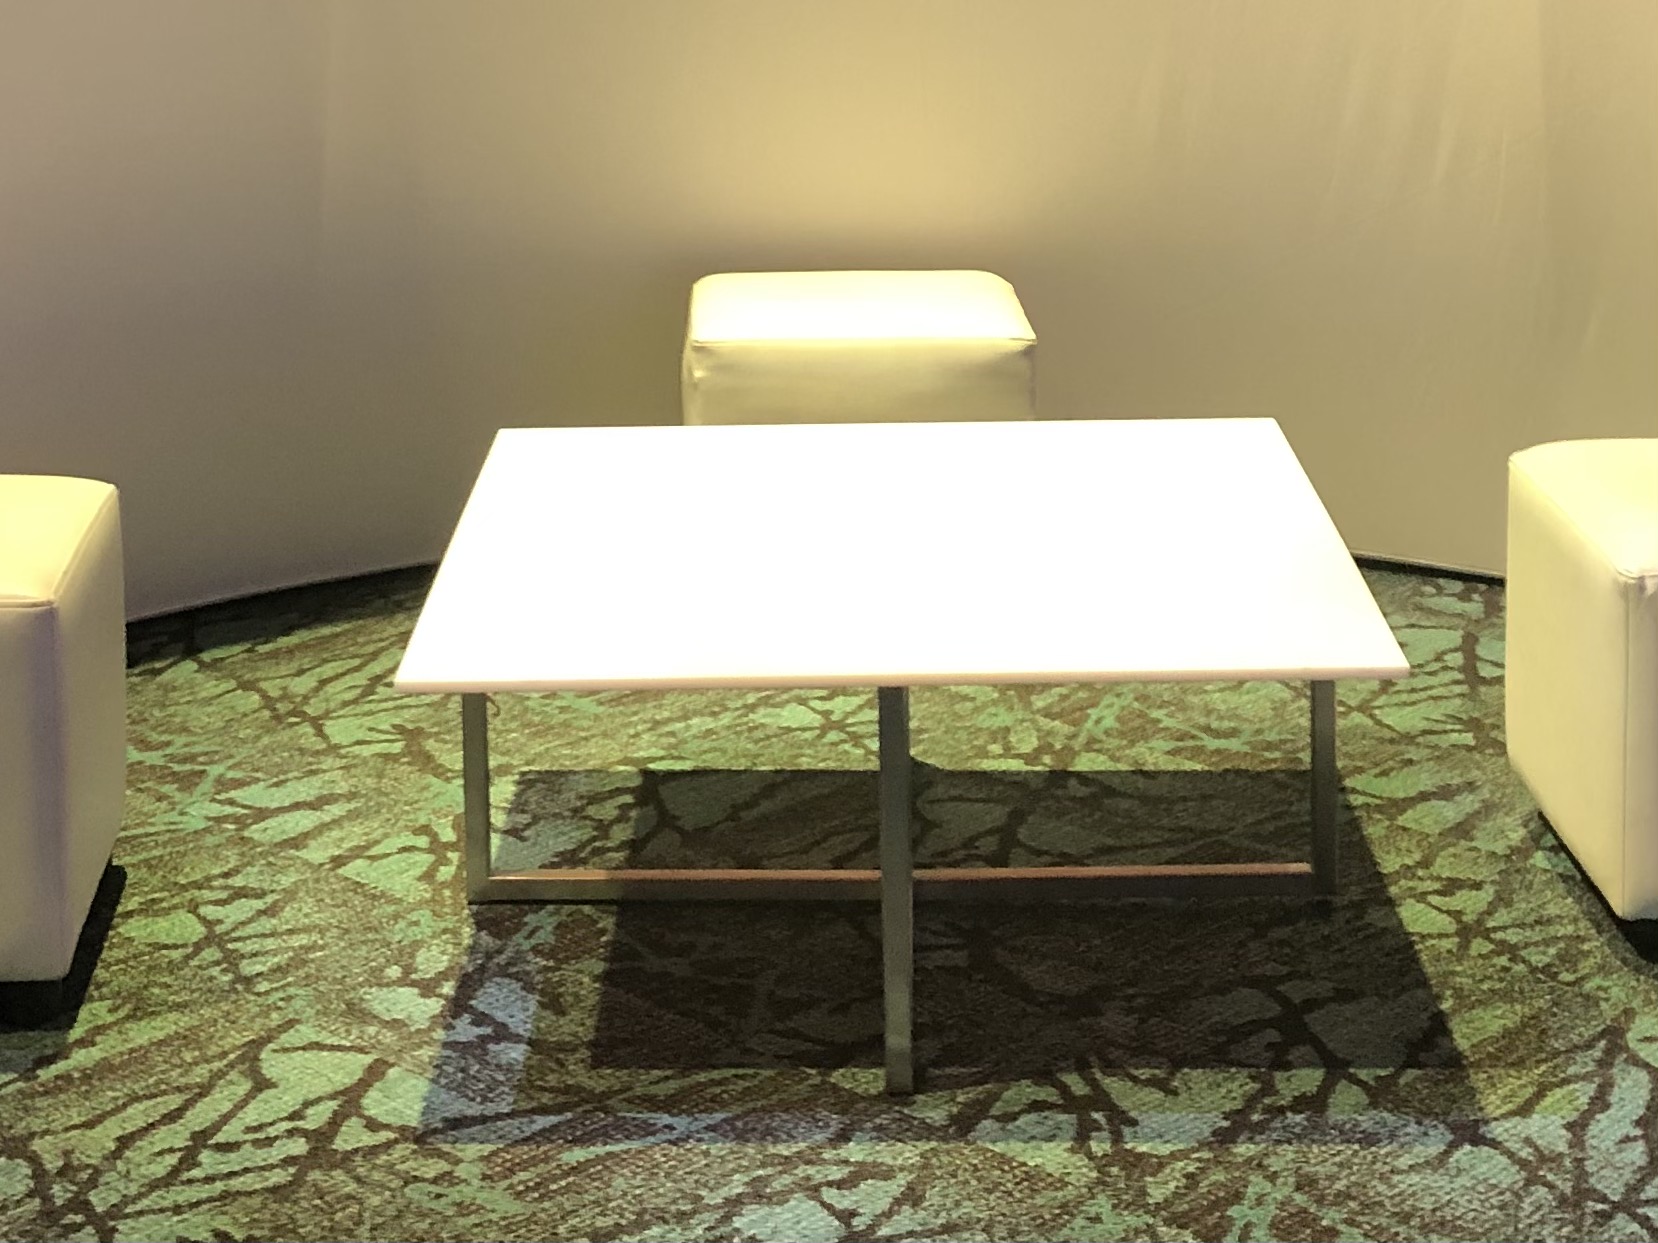 Cross coffe table with oval glass